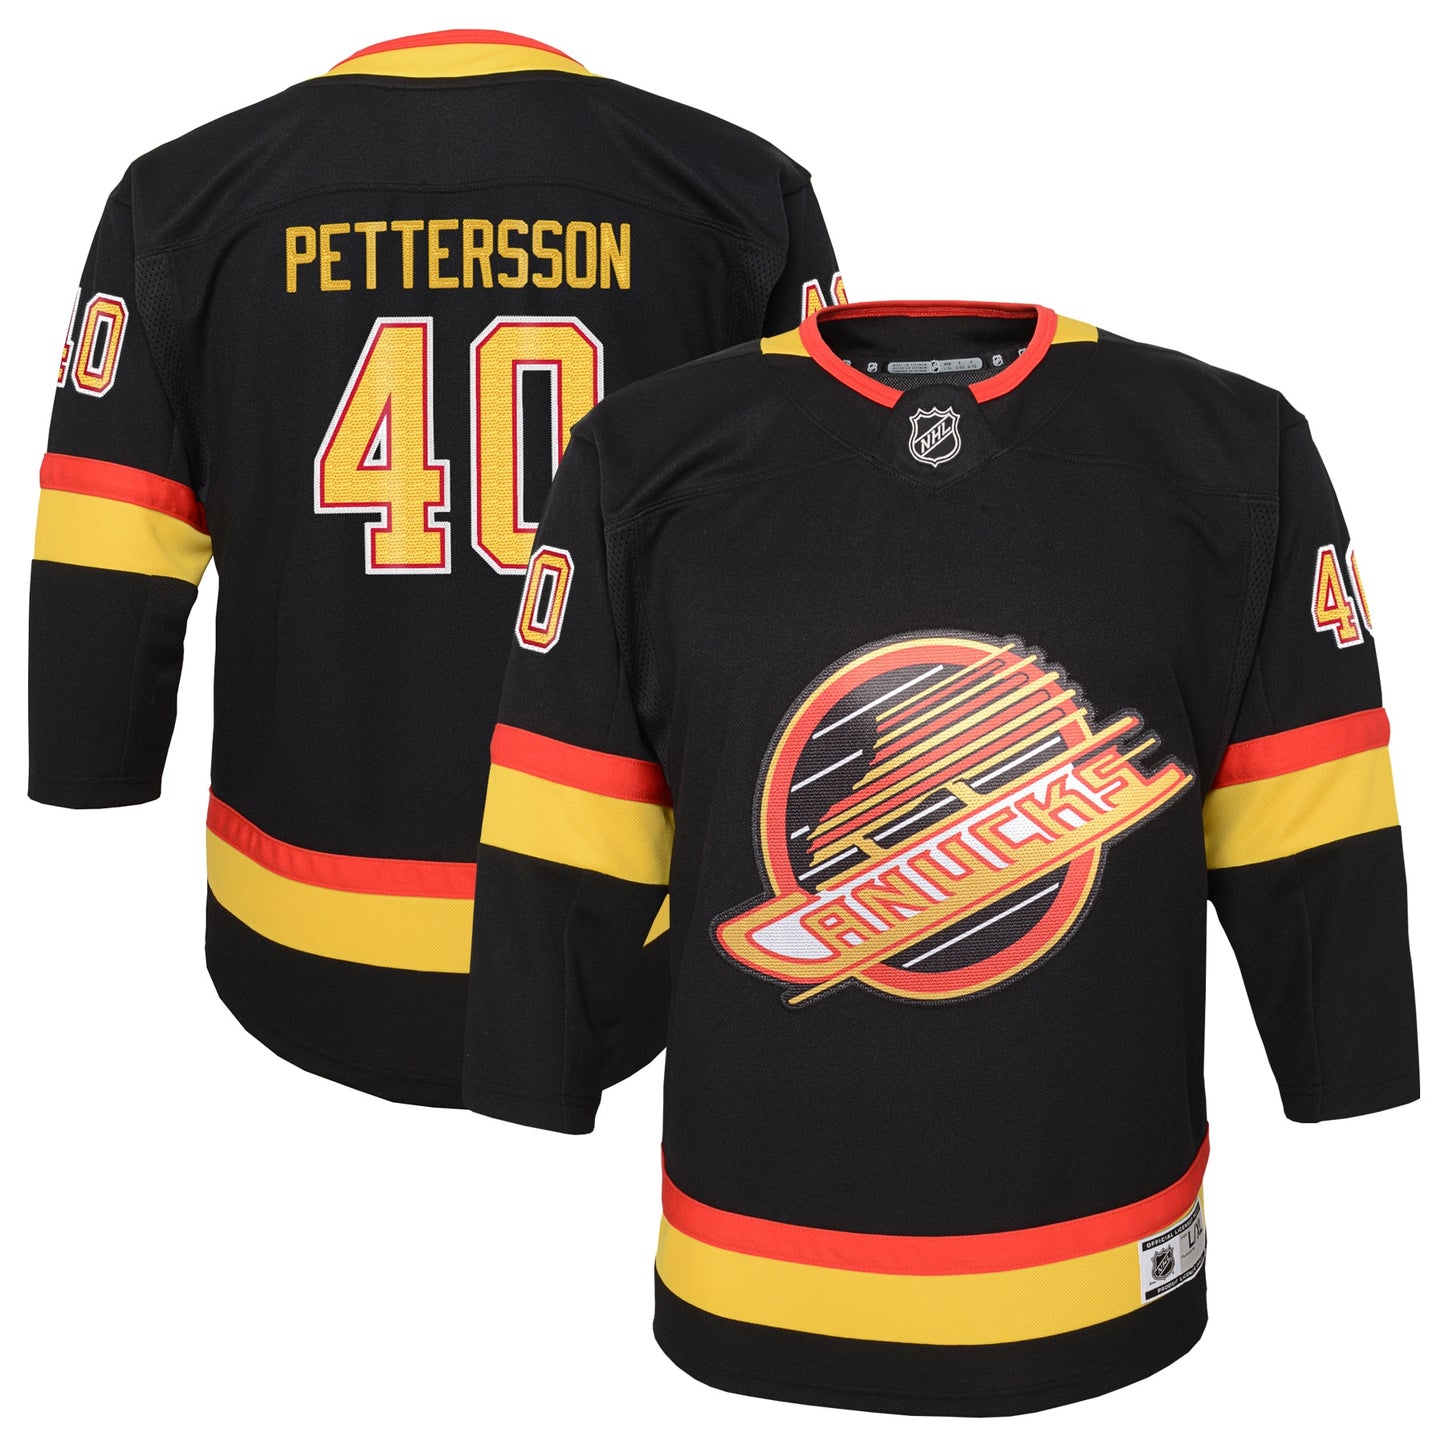 Elias Pettersson Vancouver Canucks Youth 2019/20 Flying Skate Premier Player Jersey - Black